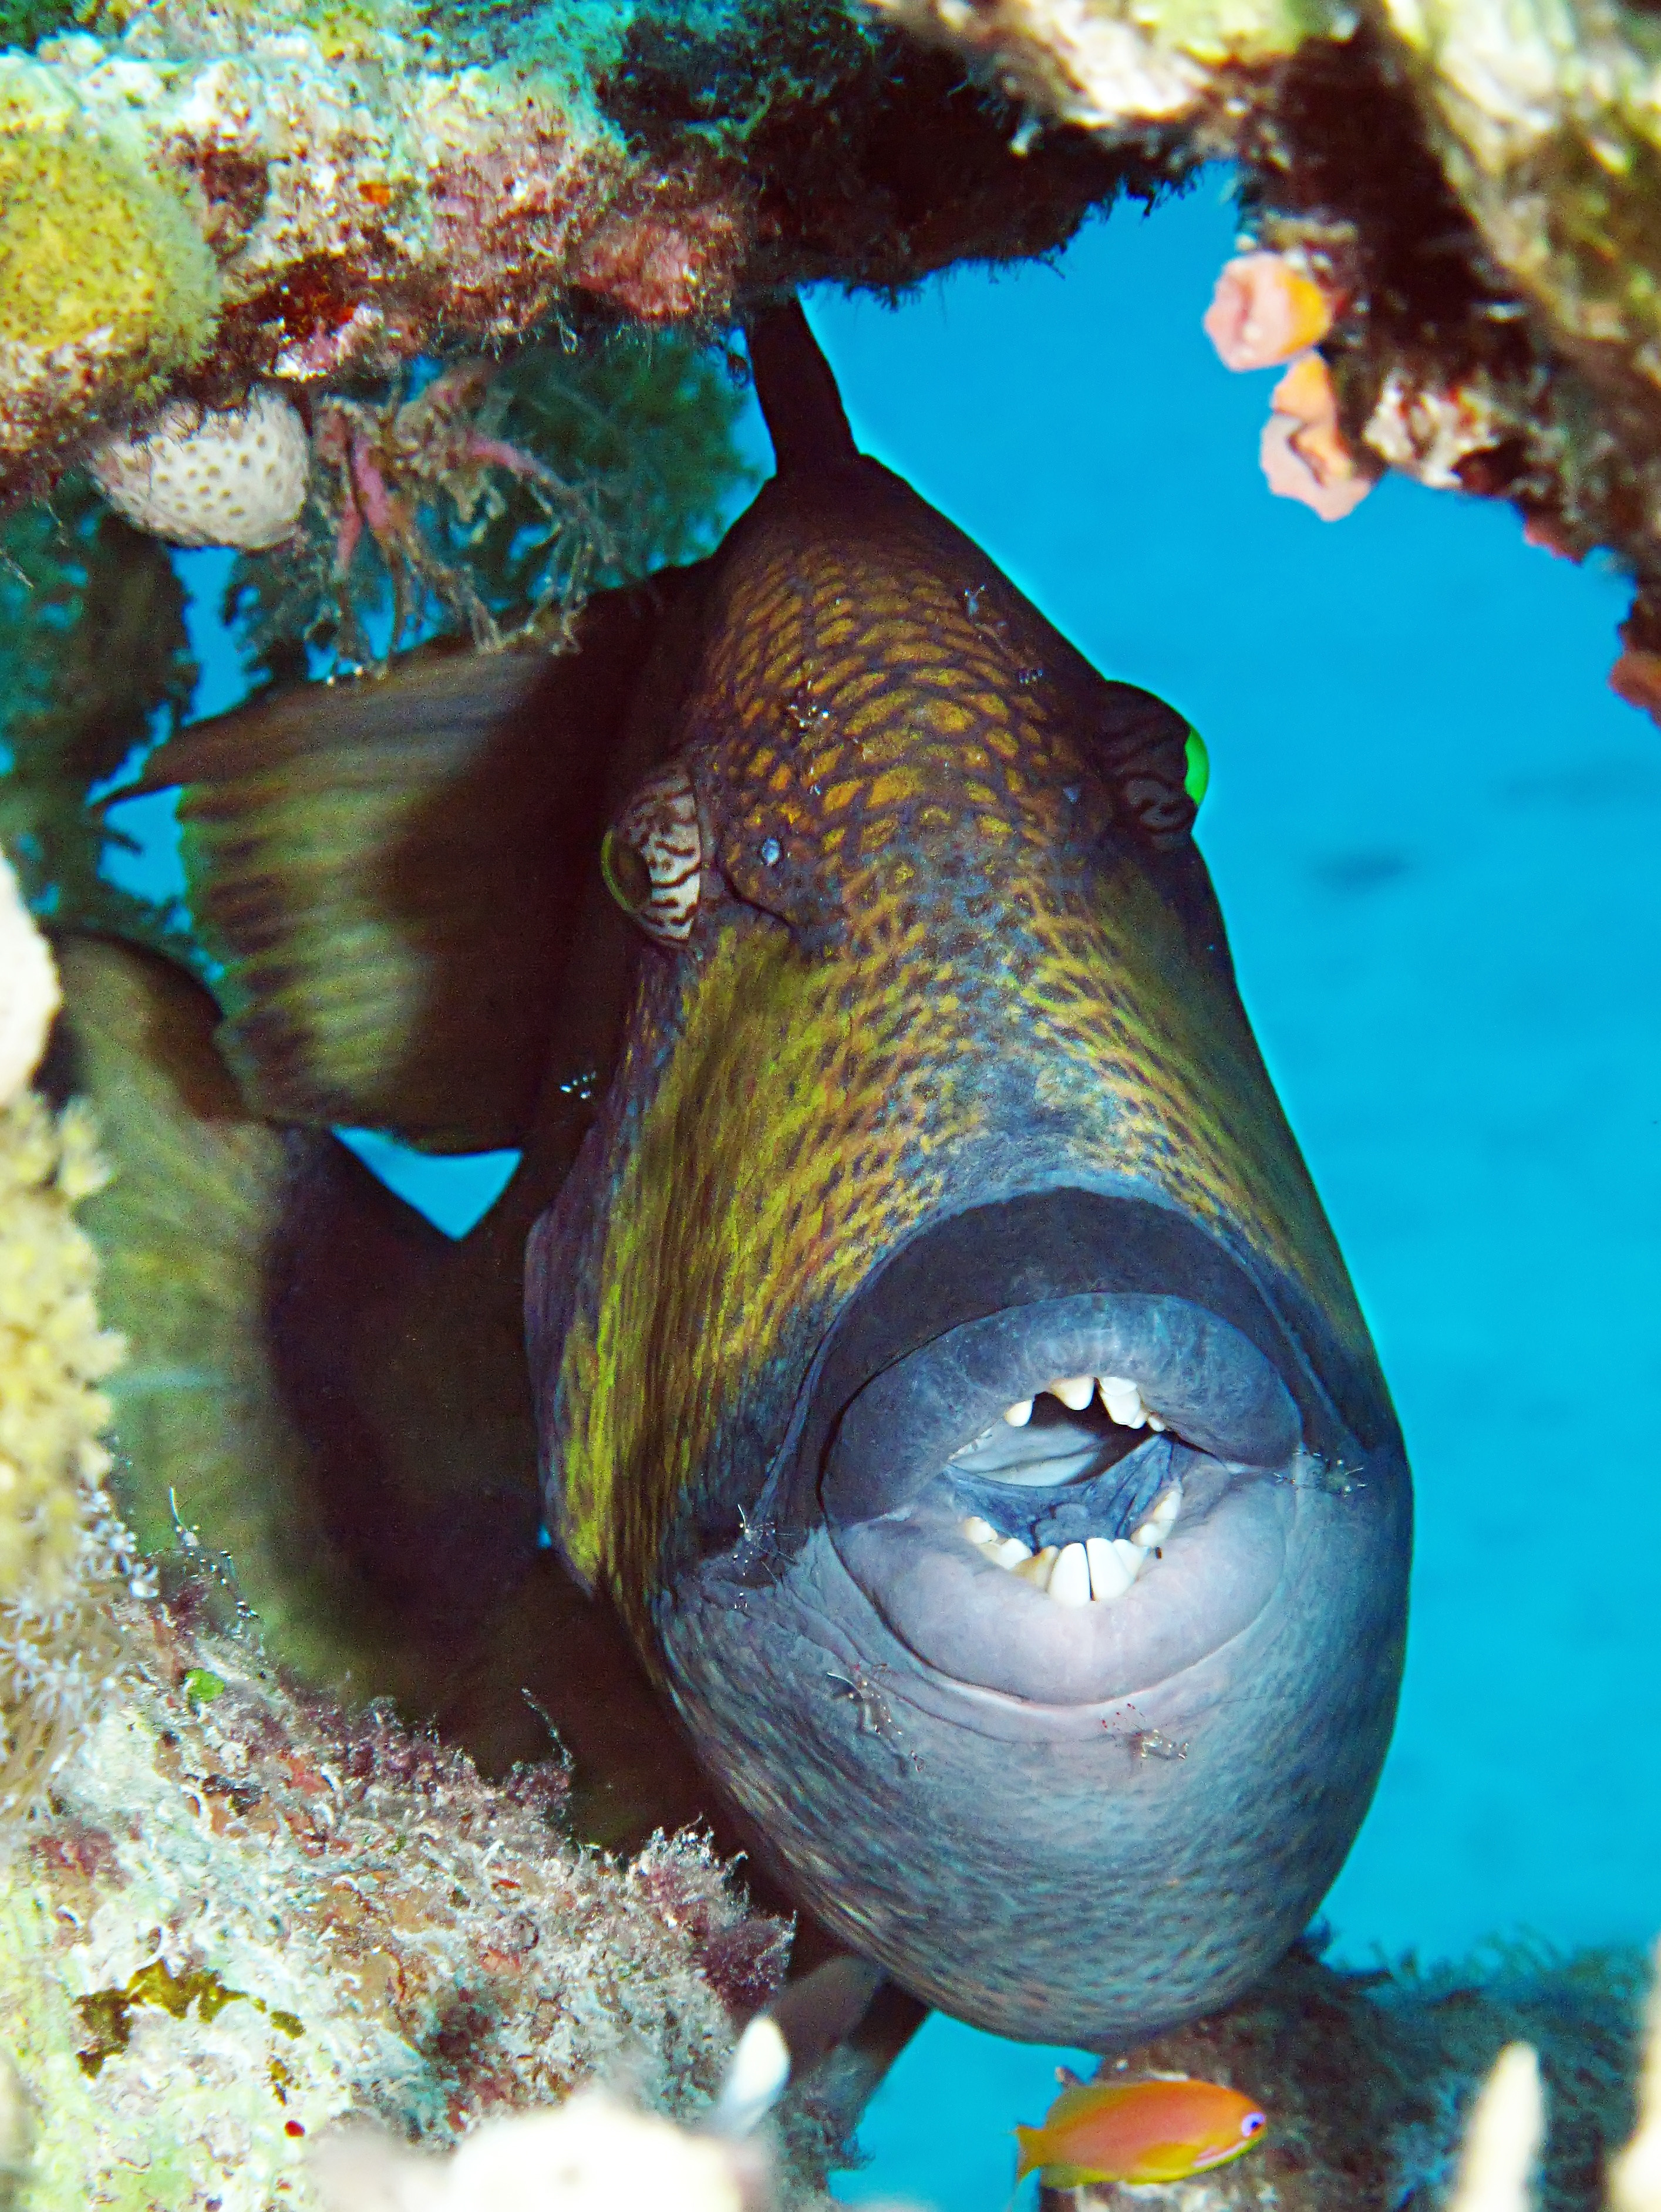 Parrotfish smiles for diver photos as he takes shelter in a hole within the coral structures